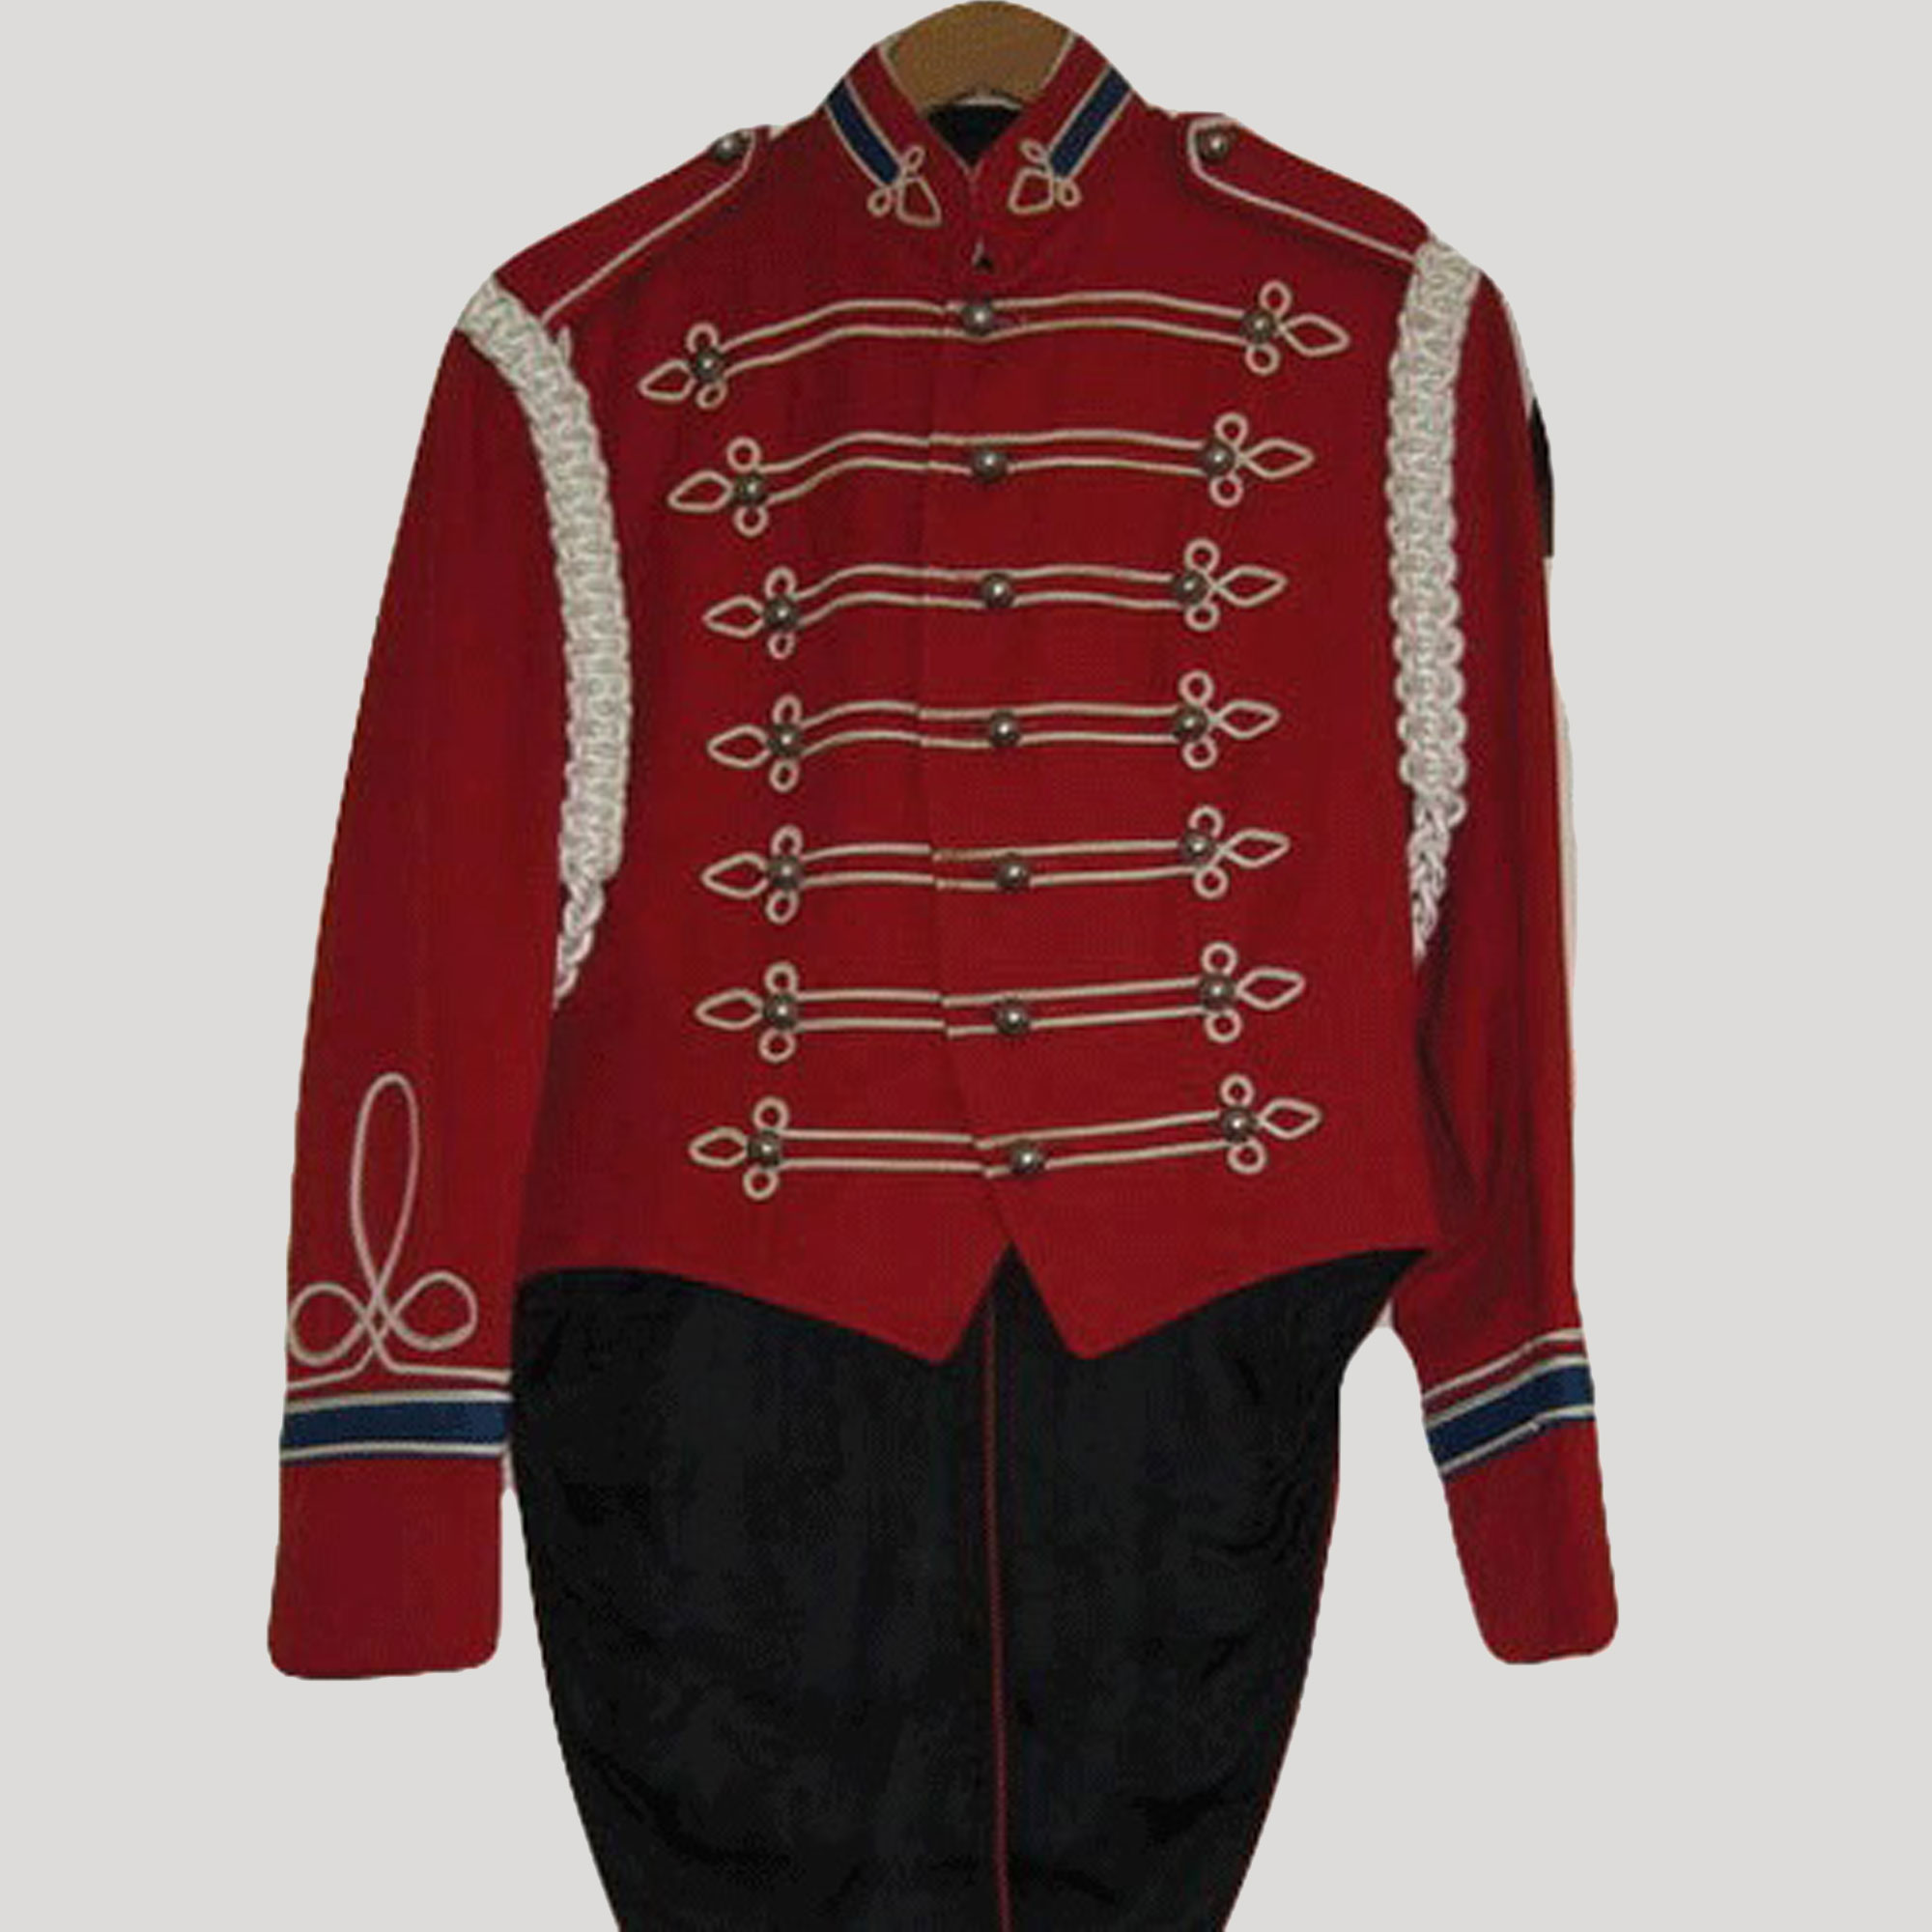 New Marching Band Golden Braid Men’s Red Wool Military Jacket